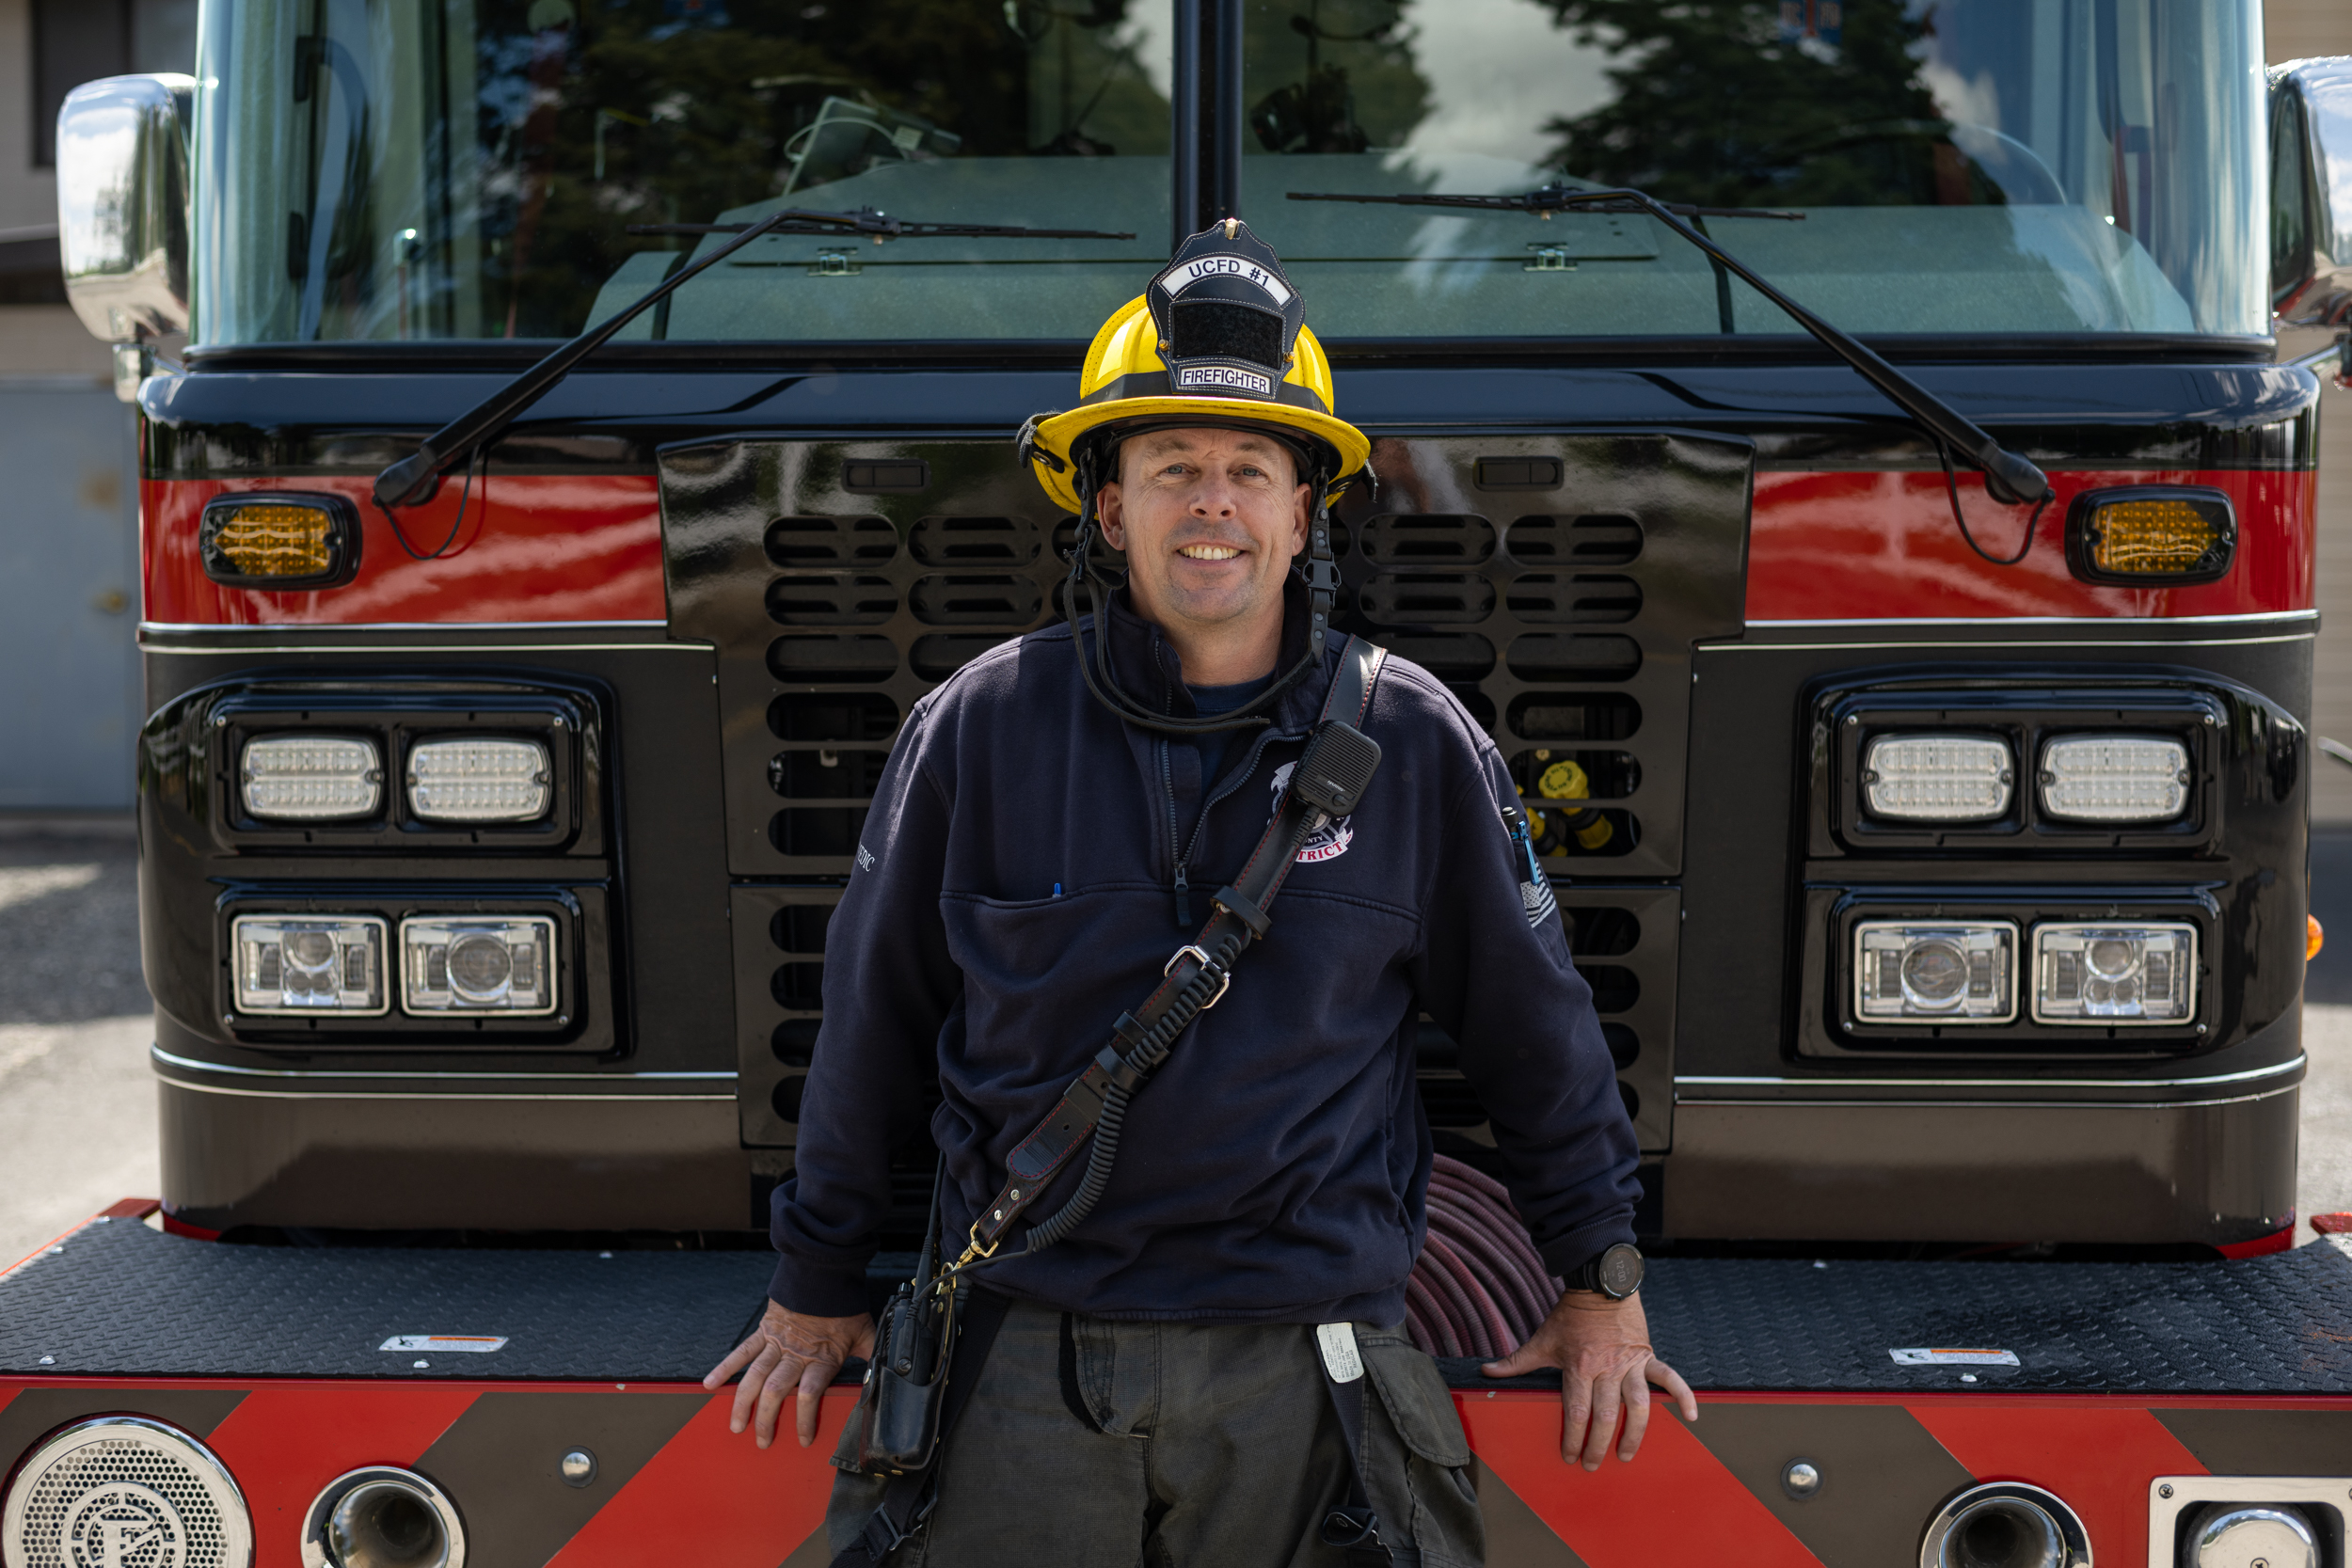 BMCC's Chris Wrathall stands in front of a fire truck to promote EMS program